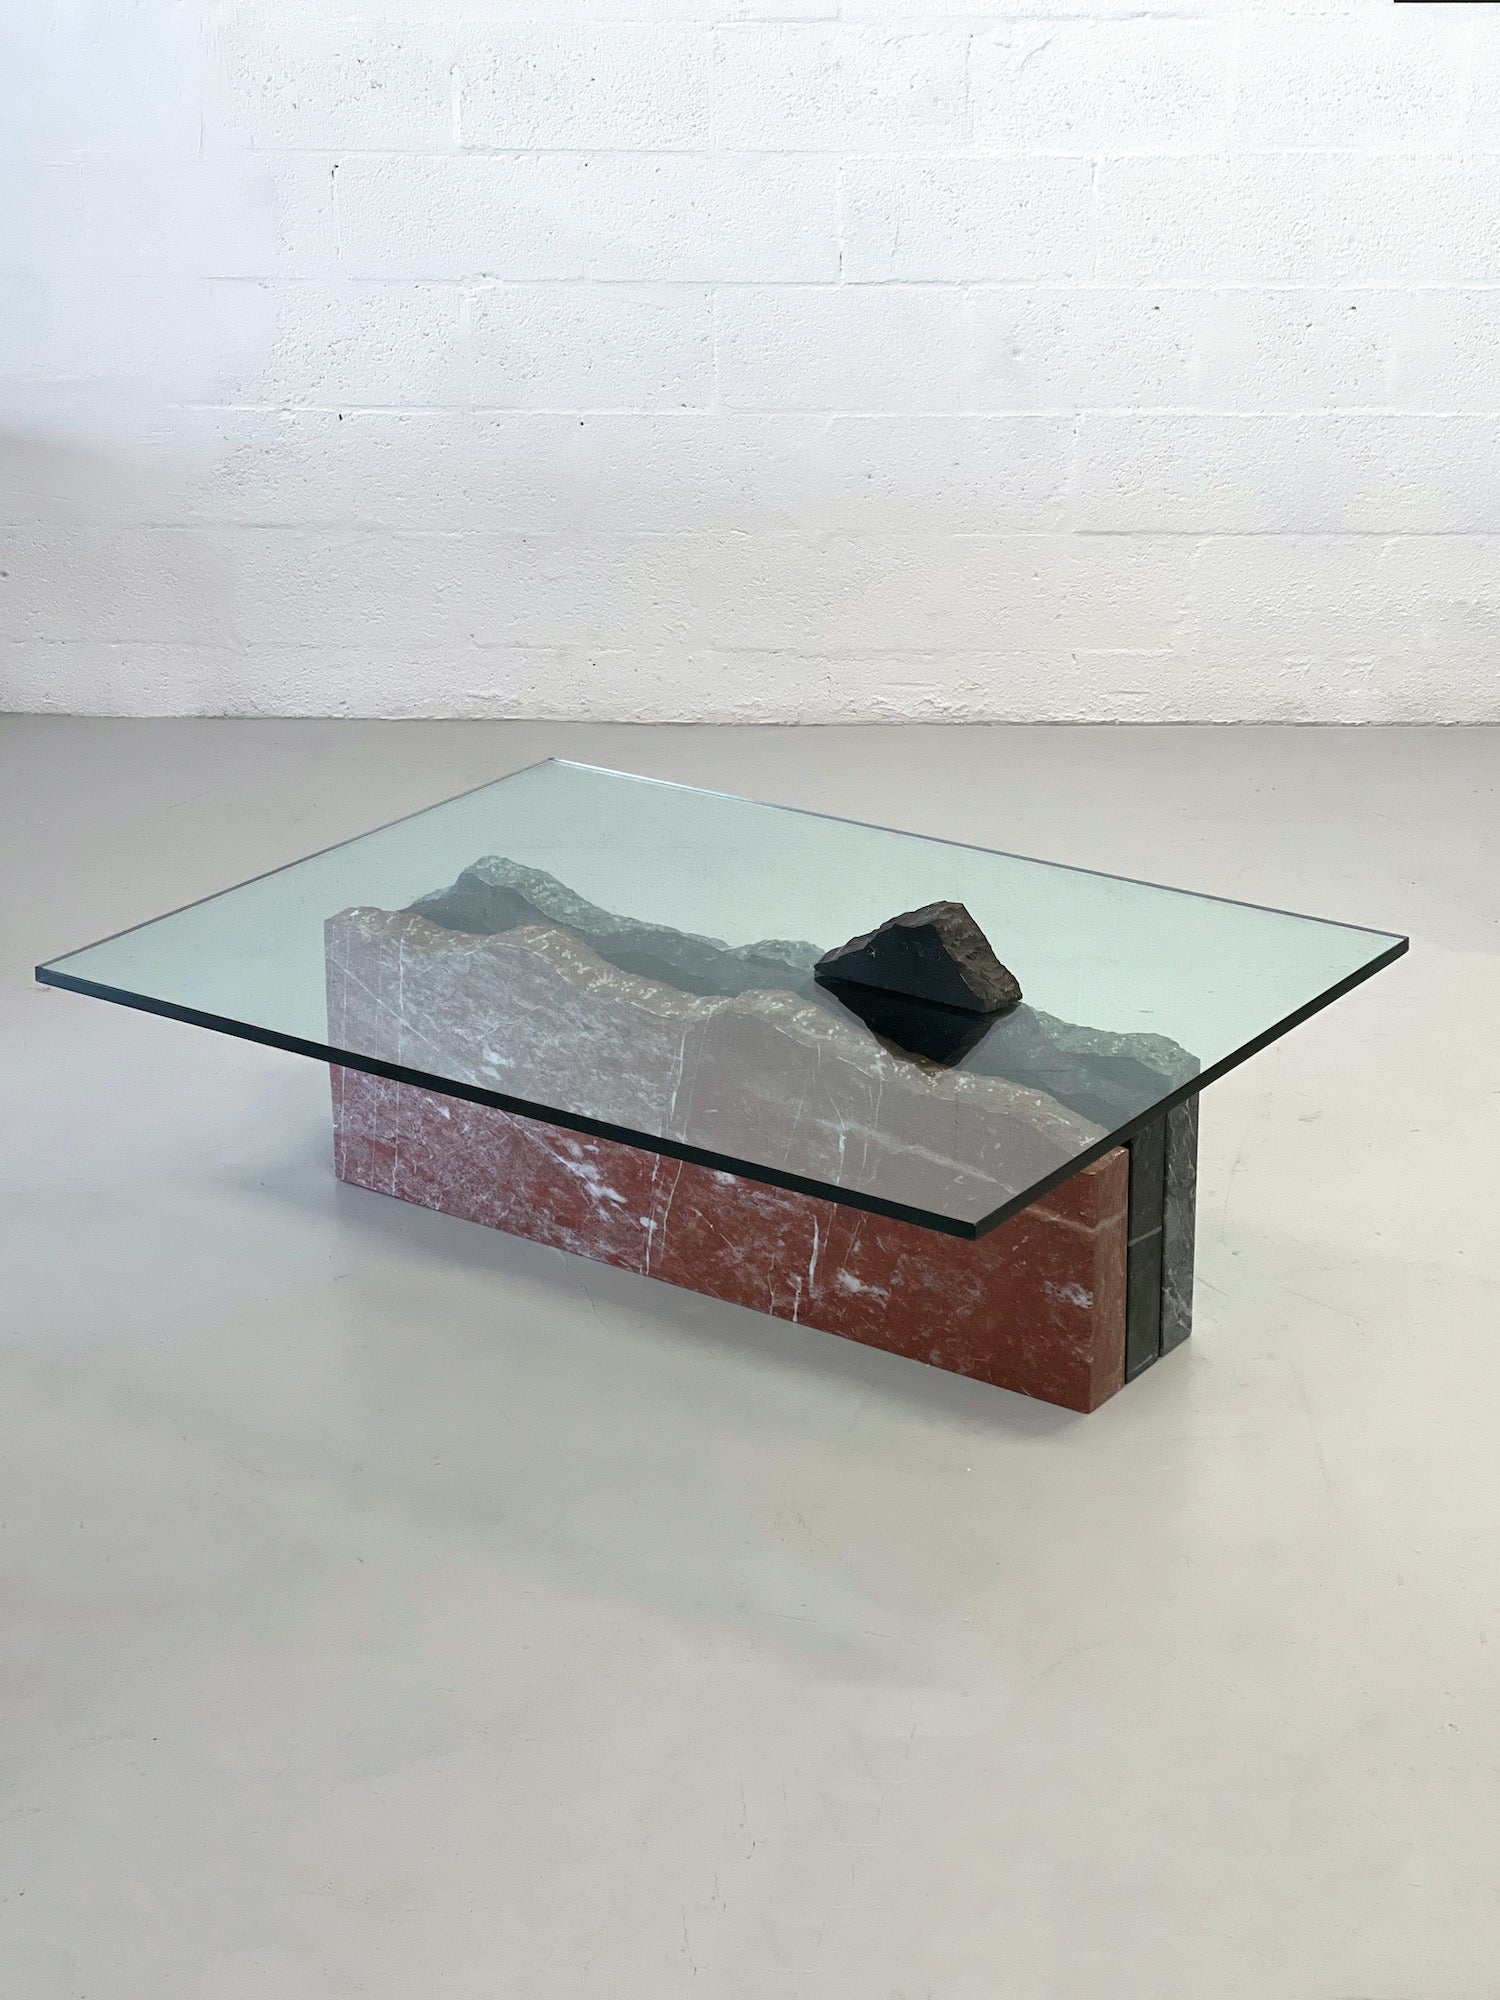 Rare 'Mountain Range' Coffee Table by SITE for Casigliani, 1989